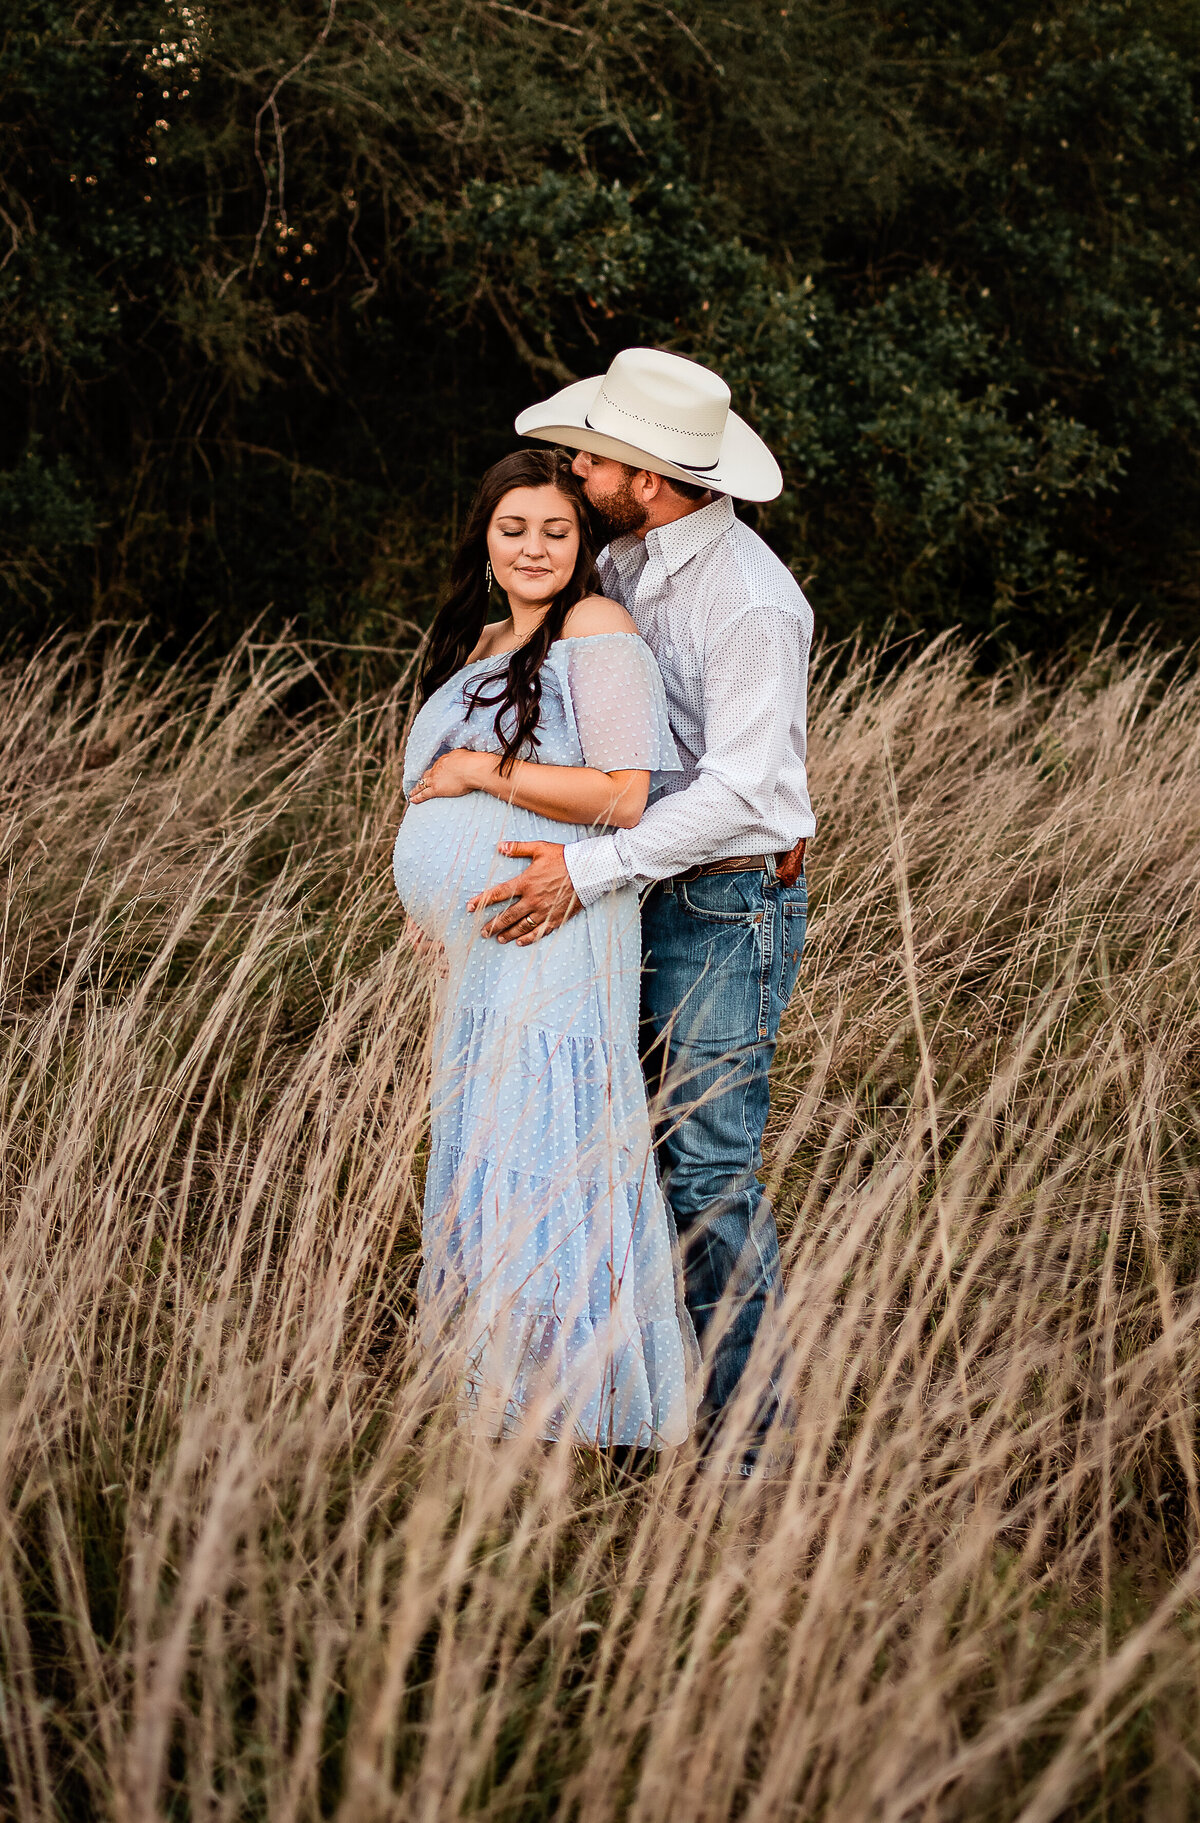 A dad to be hugs his pregnant wife from nehind and kisses her forehead in a field of long grass.